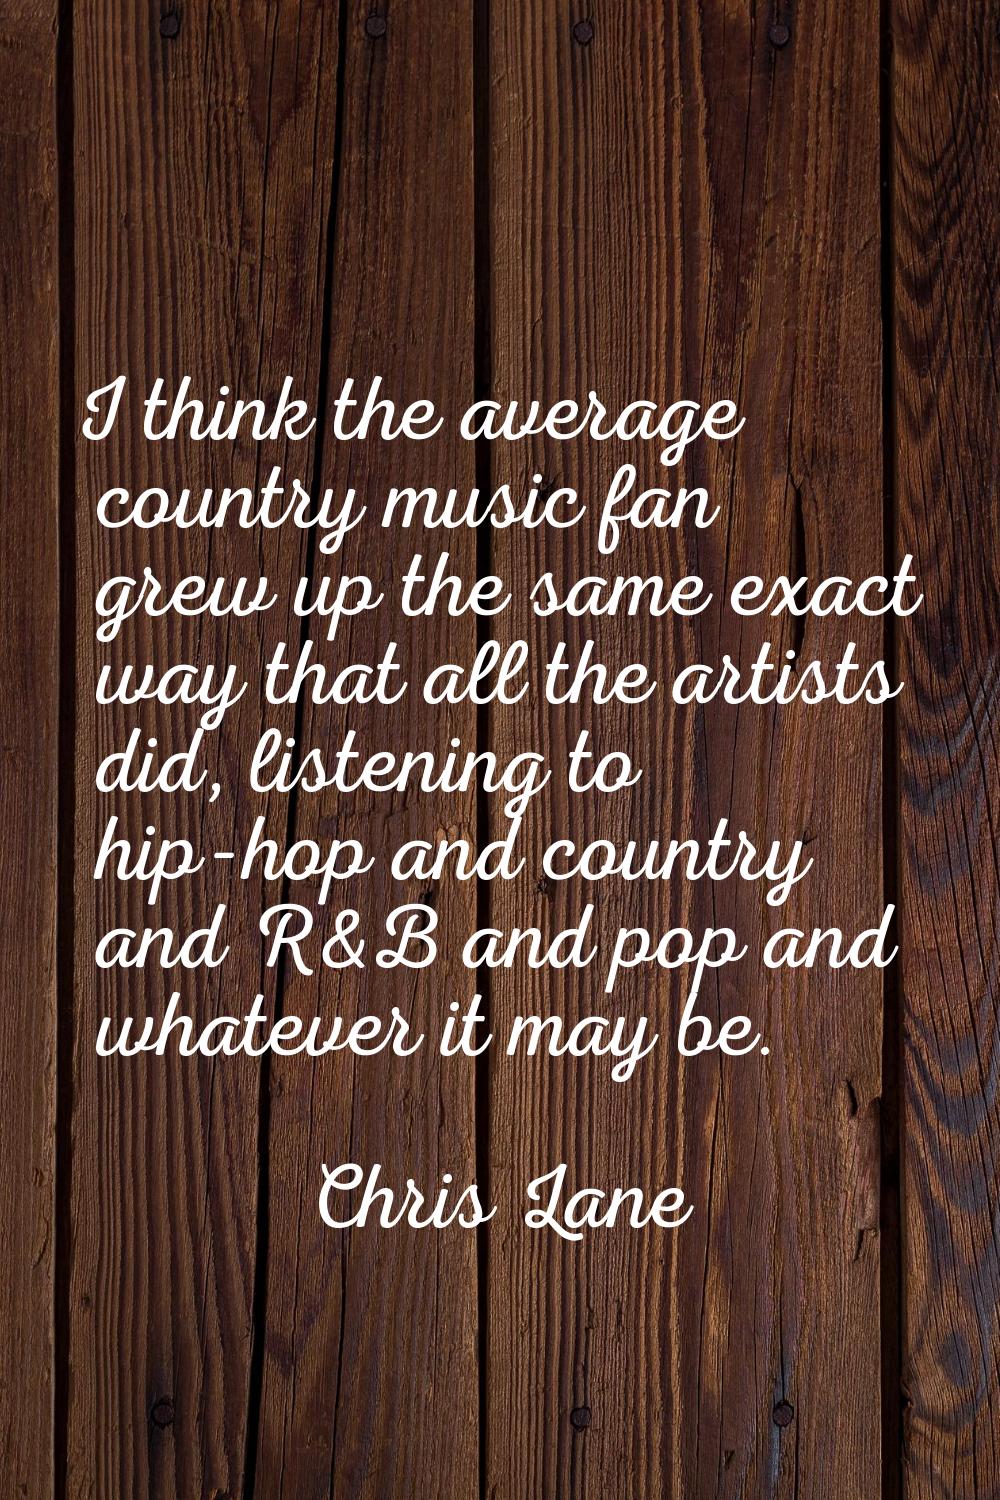 I think the average country music fan grew up the same exact way that all the artists did, listenin